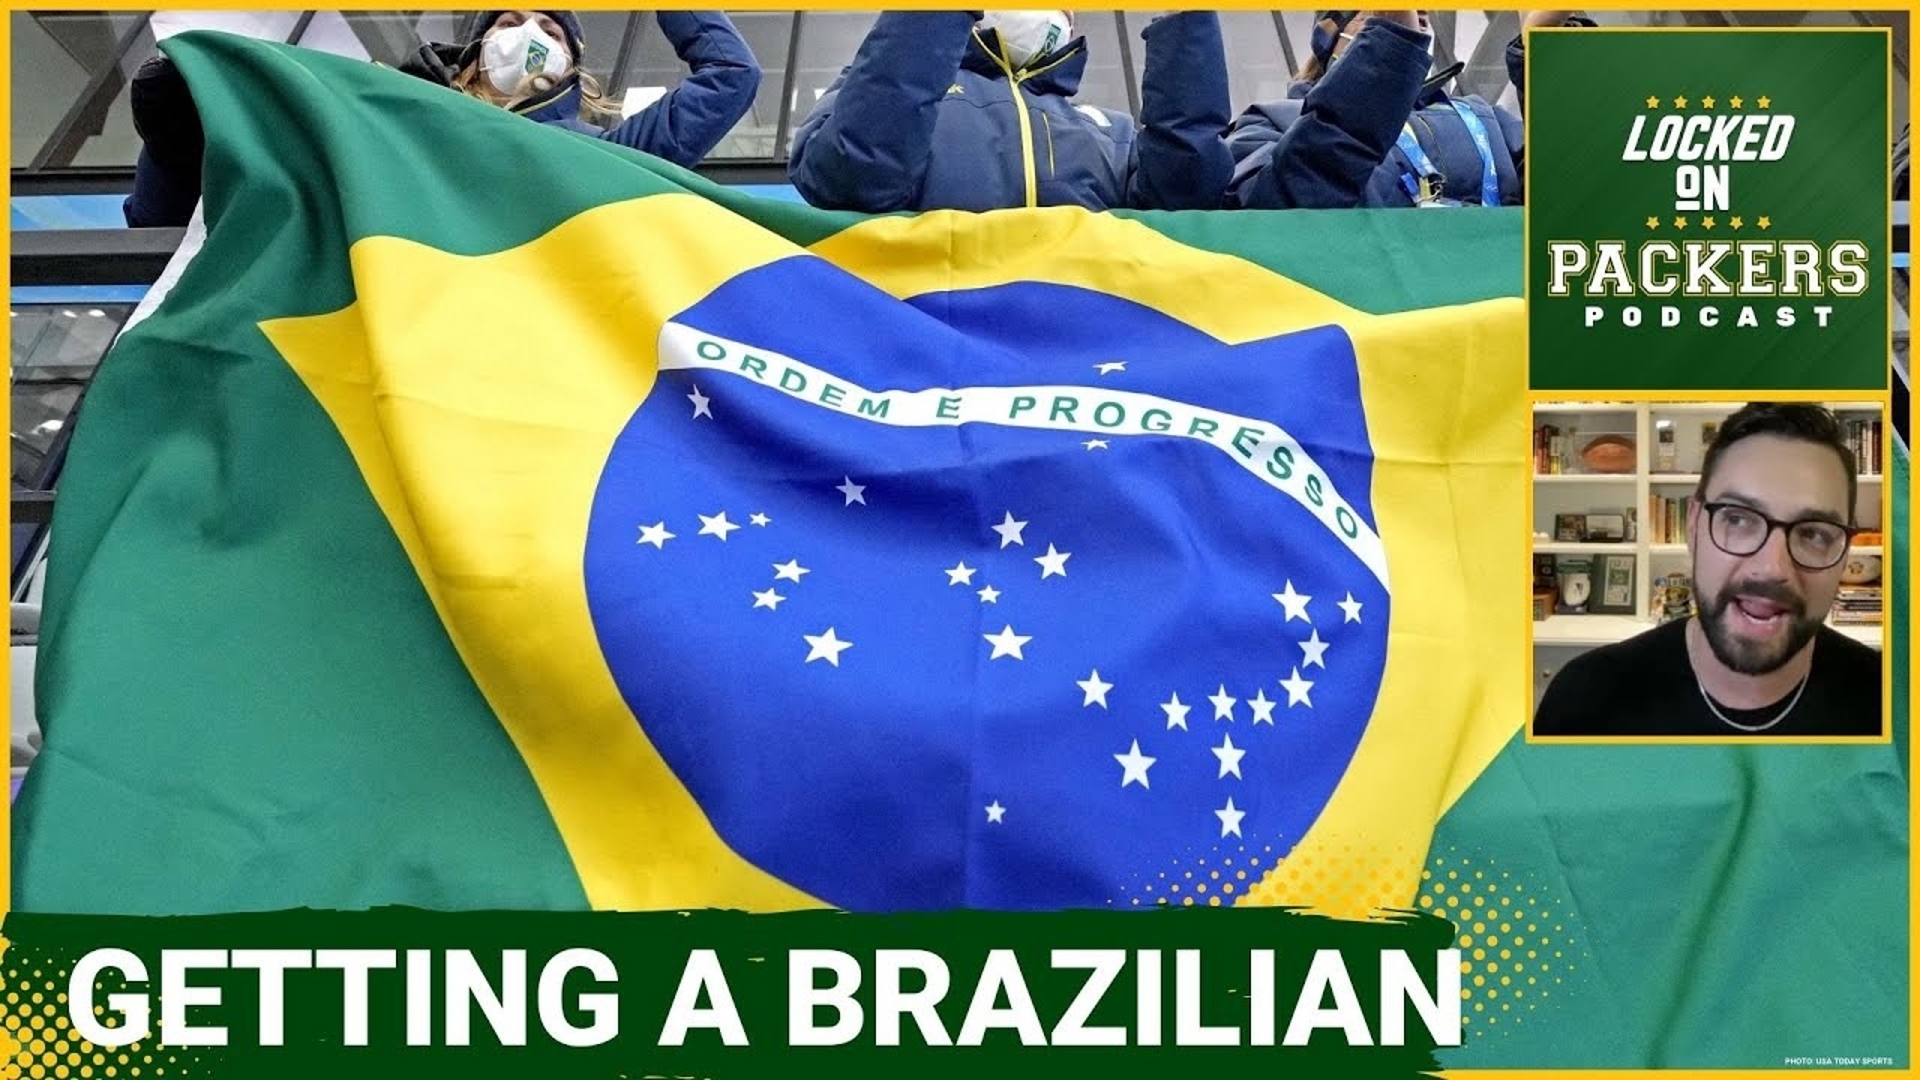 The Green Bay Packers are Brazil's NFL team. Wendell Ferreira from A-to-Z Sports joins me from Brazil to explain how that happened.